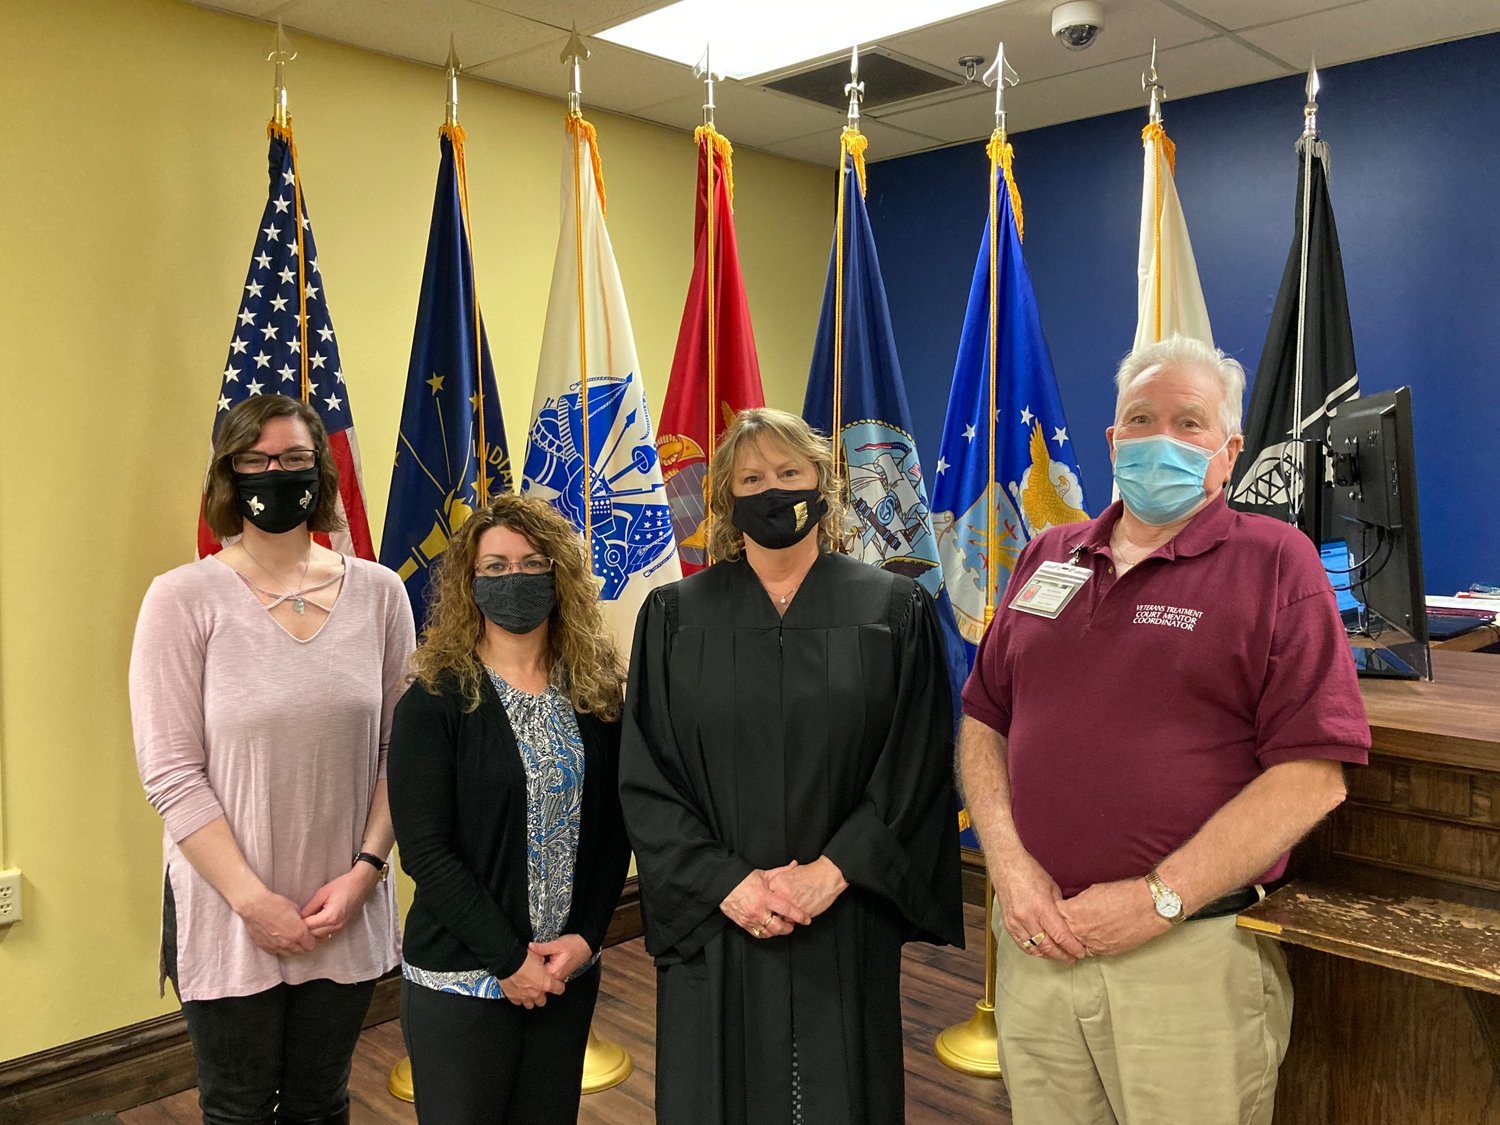 Members of the Montgomery County Veterans Treatment Court, from left, case manager Ashlee Waling, probation officer Jennifer York, Judge Peggy Lohorn, and mentor coordinator Mike Spencer stand in the courtroom.